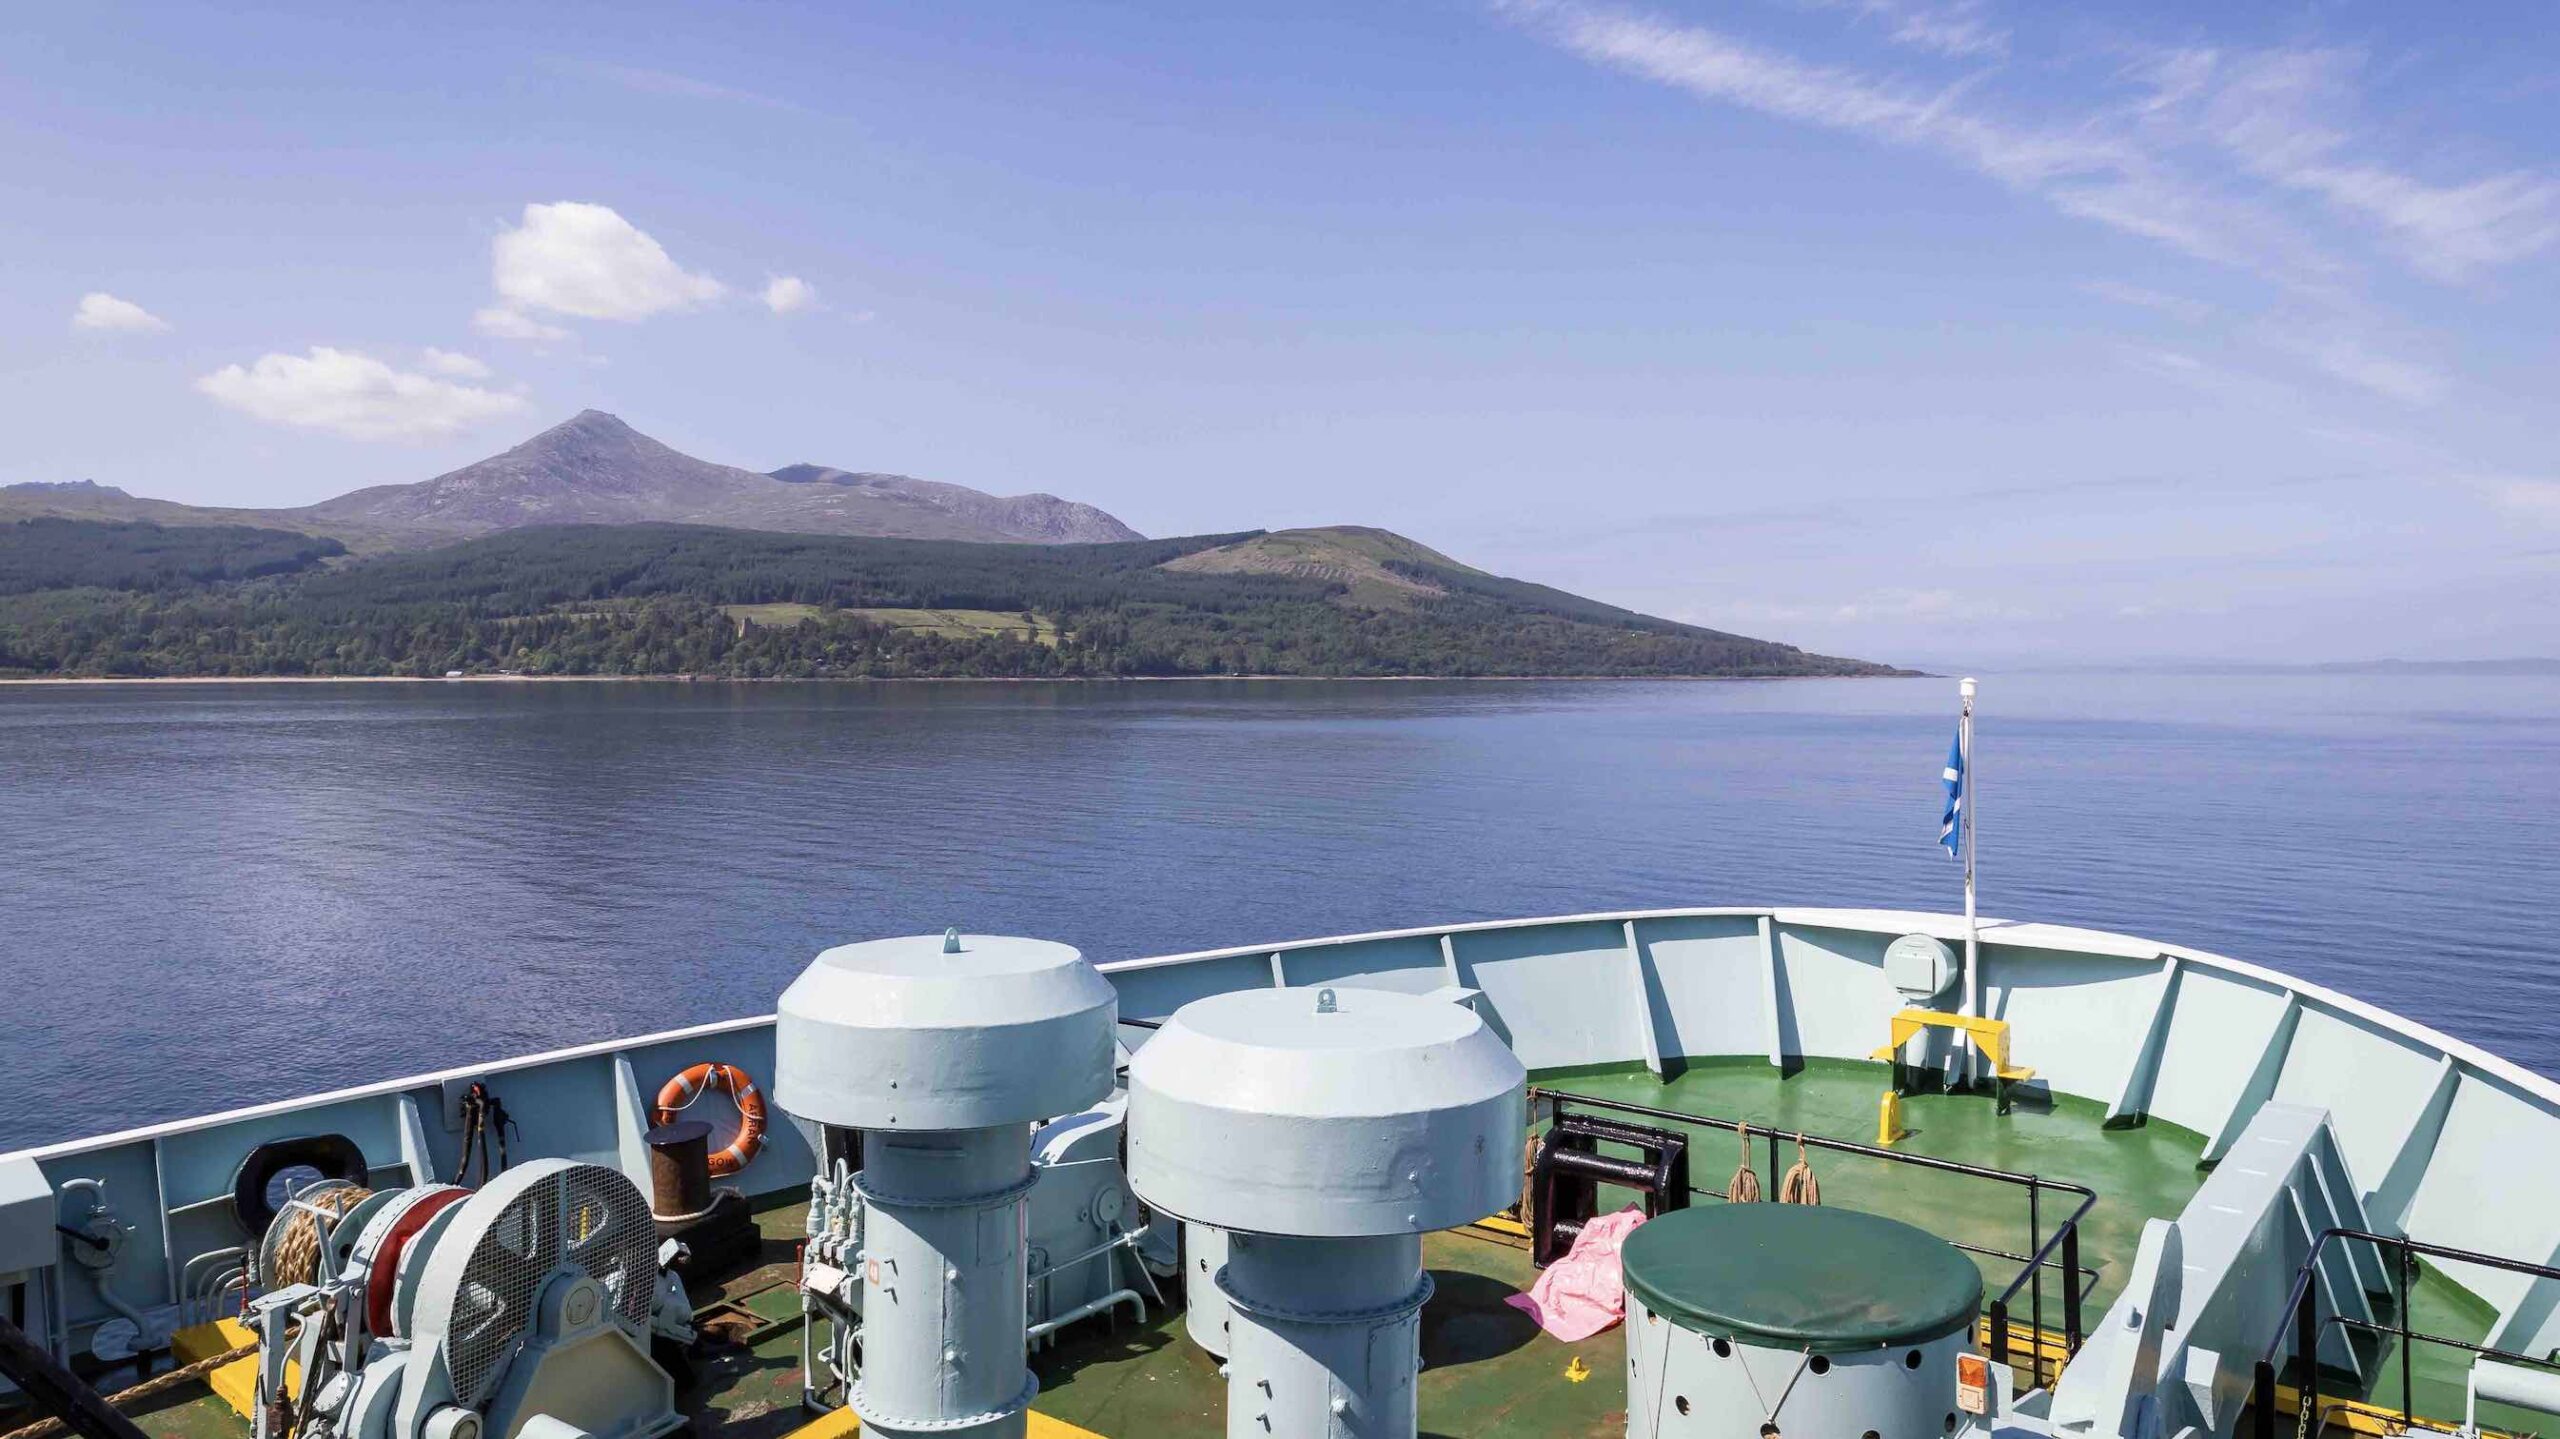 Isle of Arran Ferryshutterstock-thepalmsagency-Ferry crossing thigns to do on the Isle of Arran